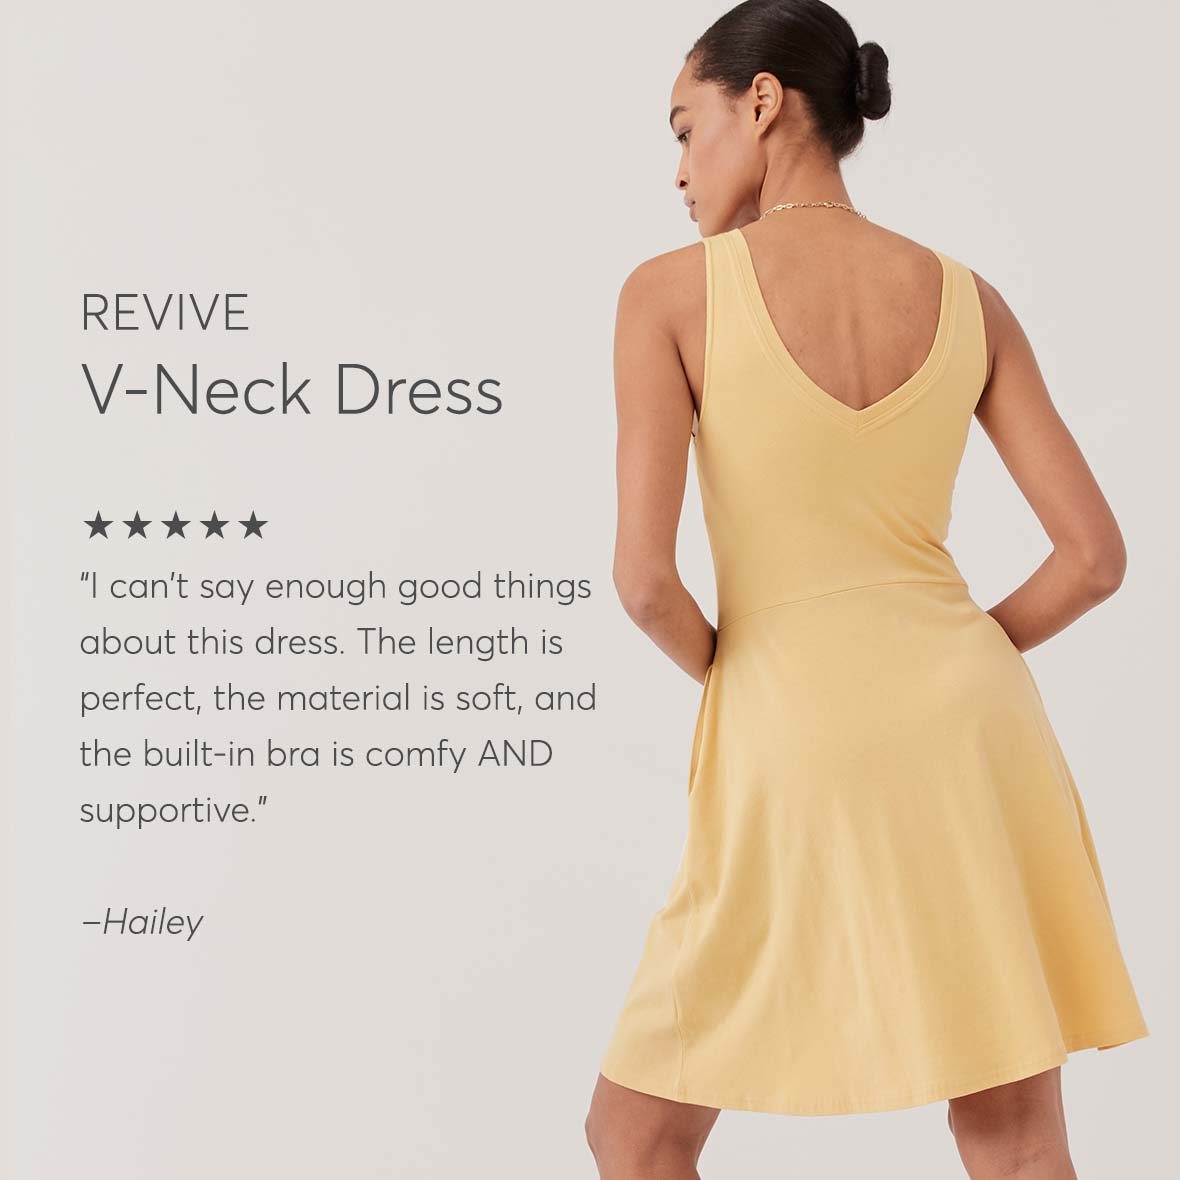 Revive V-Neck Tank Dress: I can't say enough good things about this dress. The length is perfect, the material is soft, and the built-in bra is comfy AND supportive.